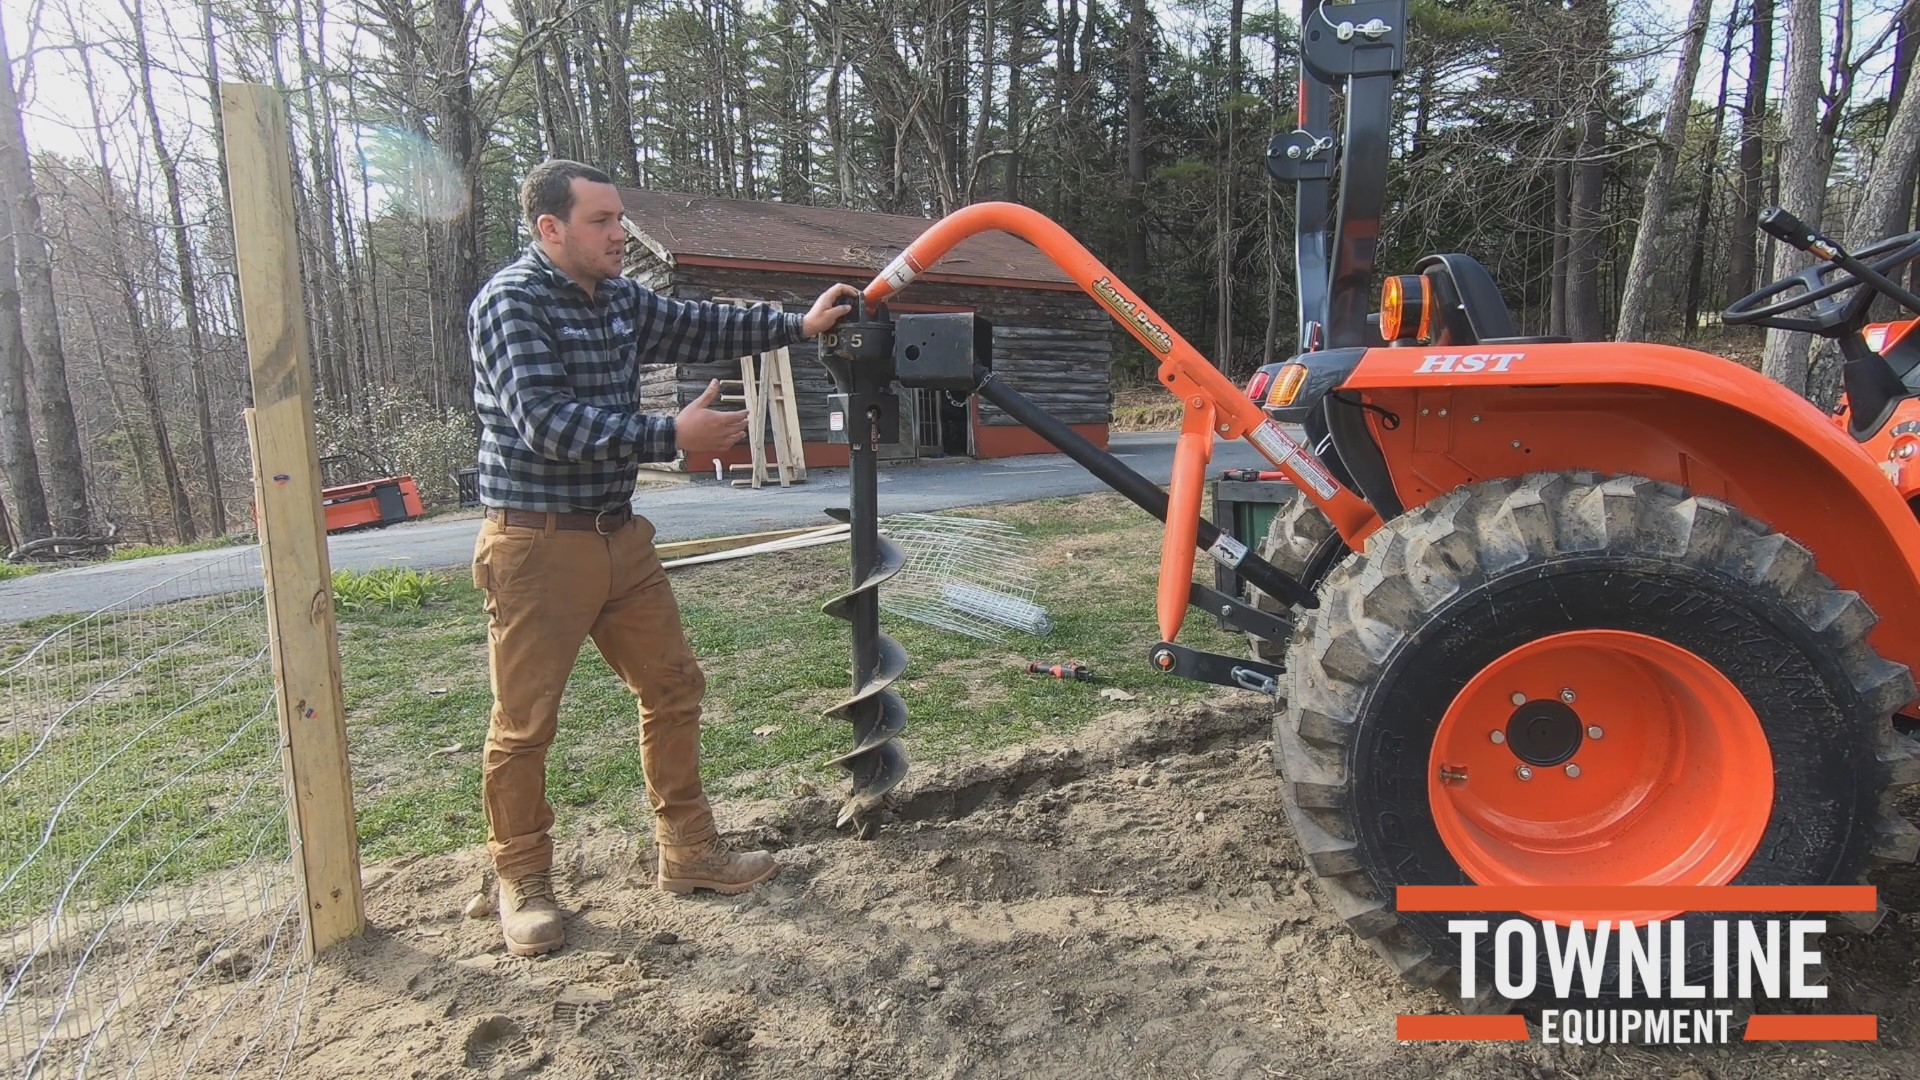 Kubota L2501 Compact Tractor Using a Post Hole Digger to Install a Trellis